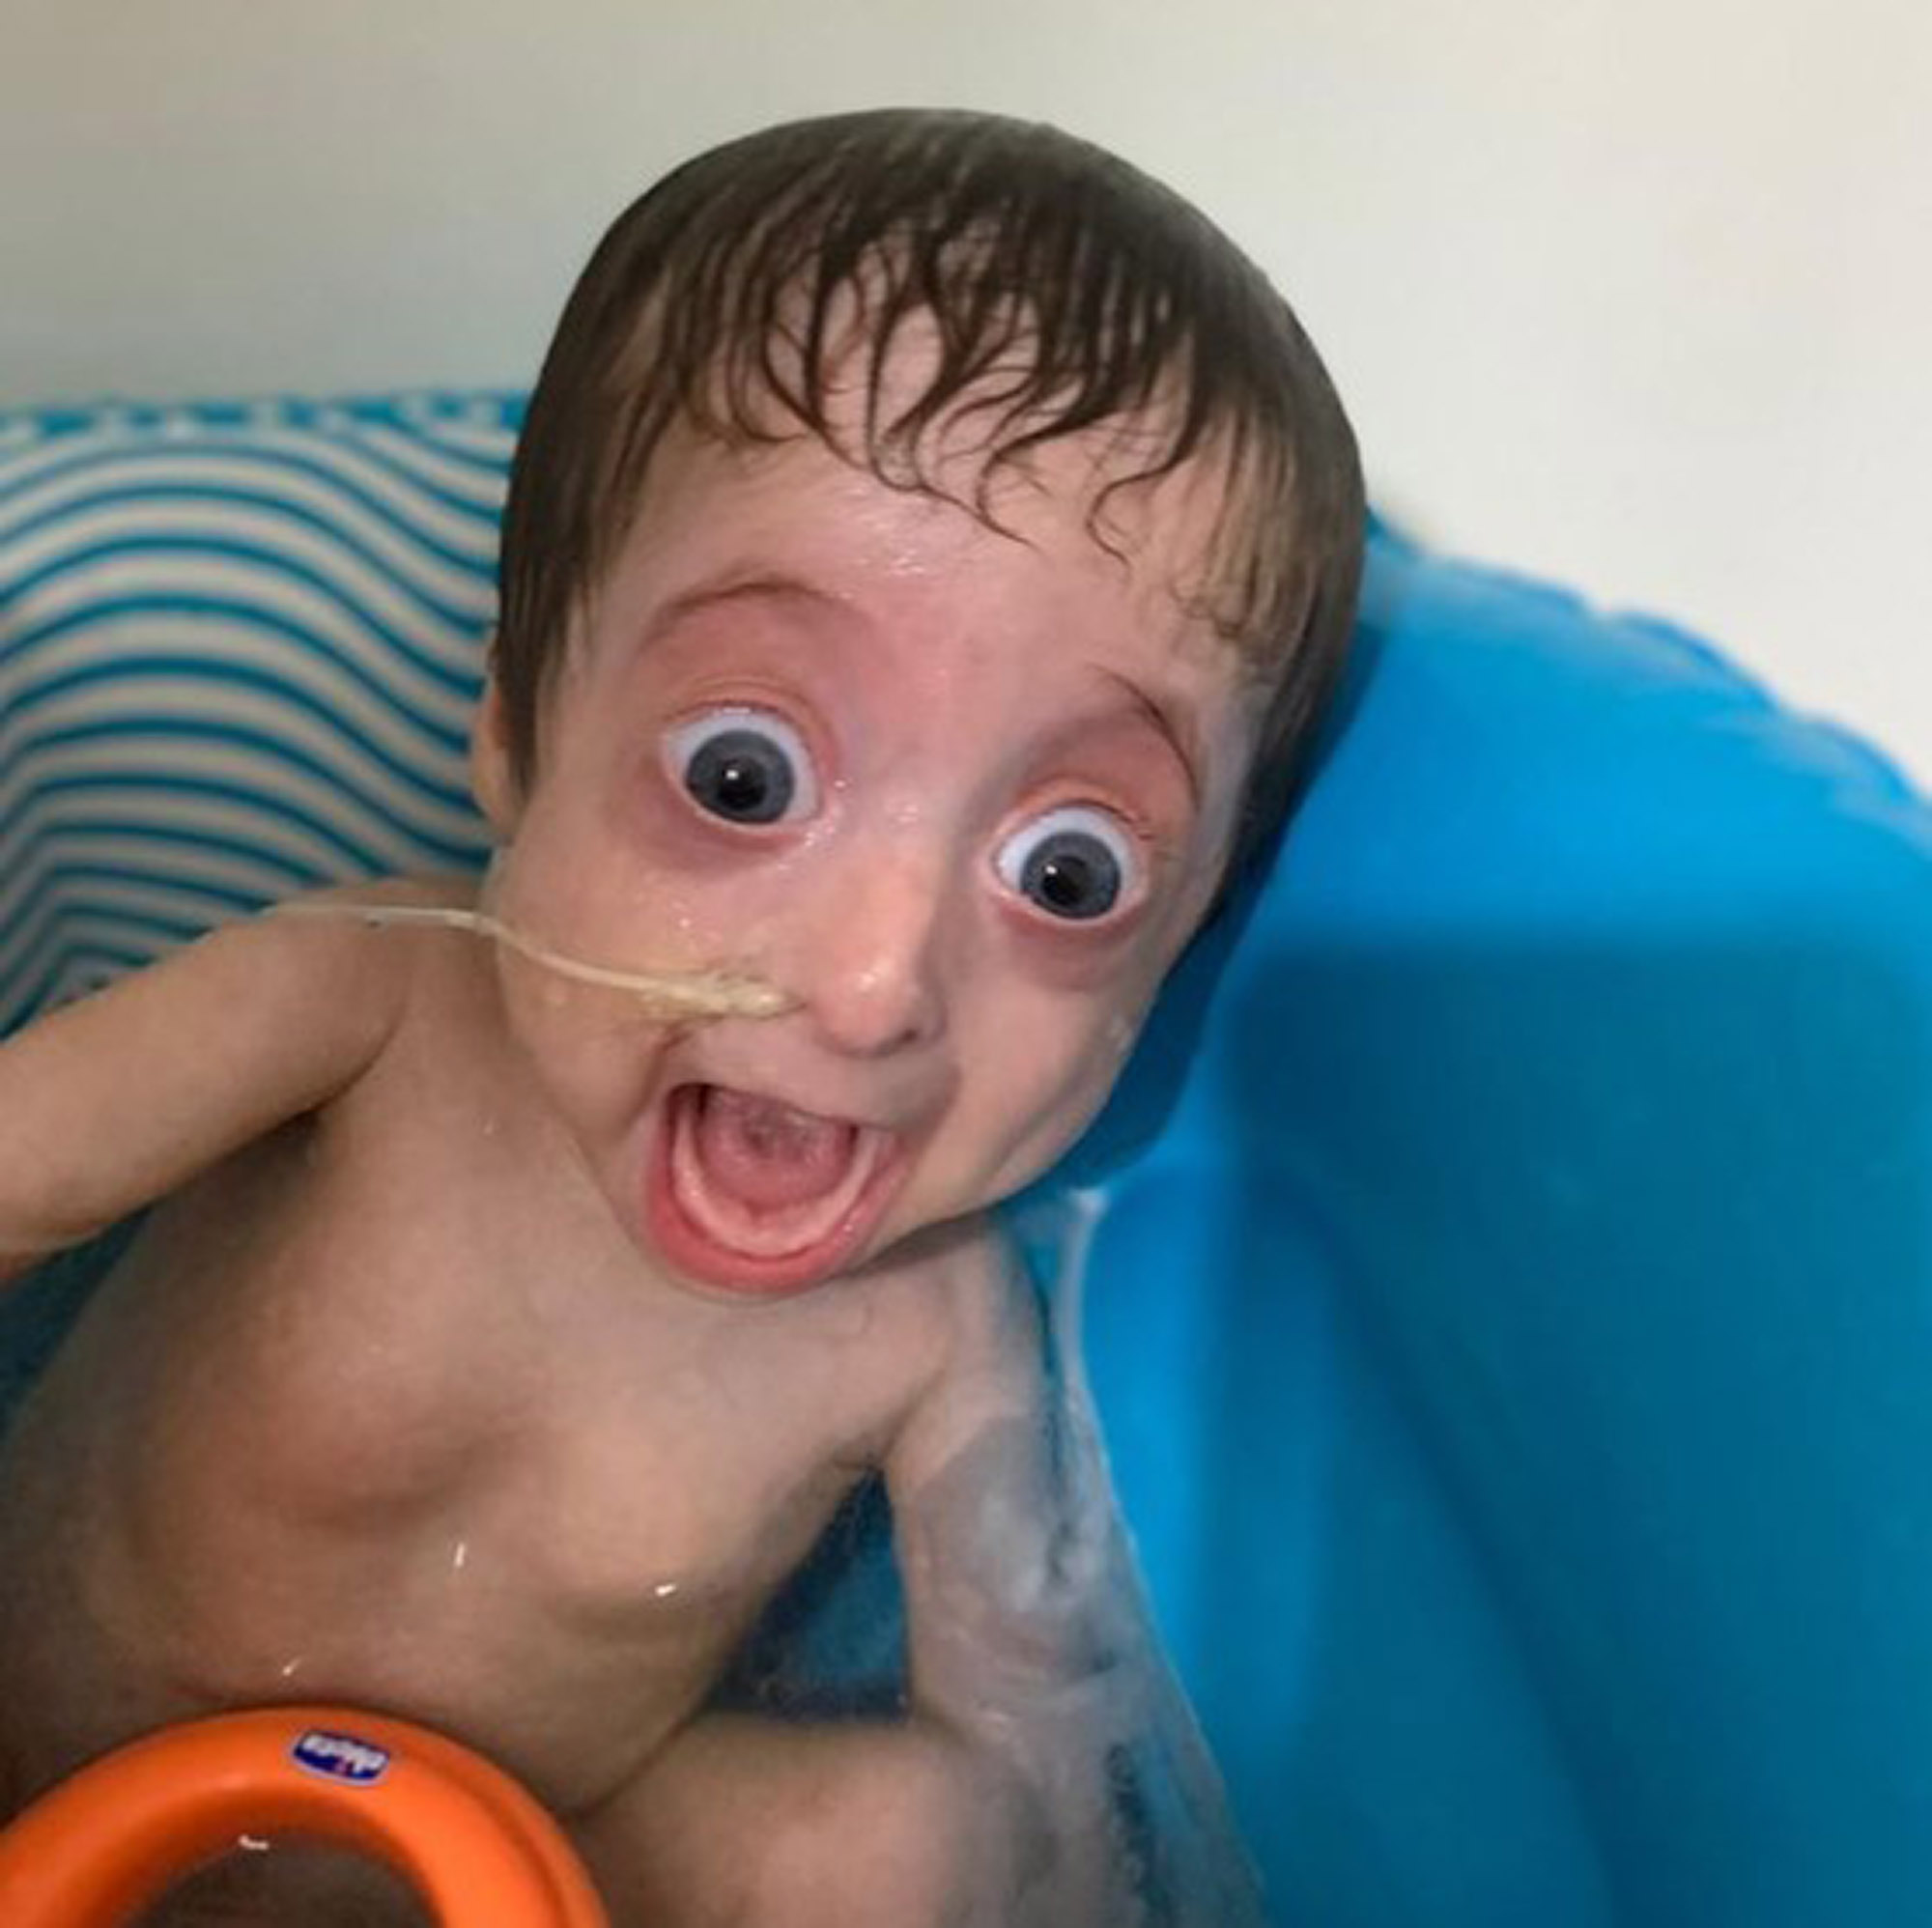 Read more about the article Benjamin Button, Little Boy Born With Old Man Syndrome Wins Hearts Worldwide